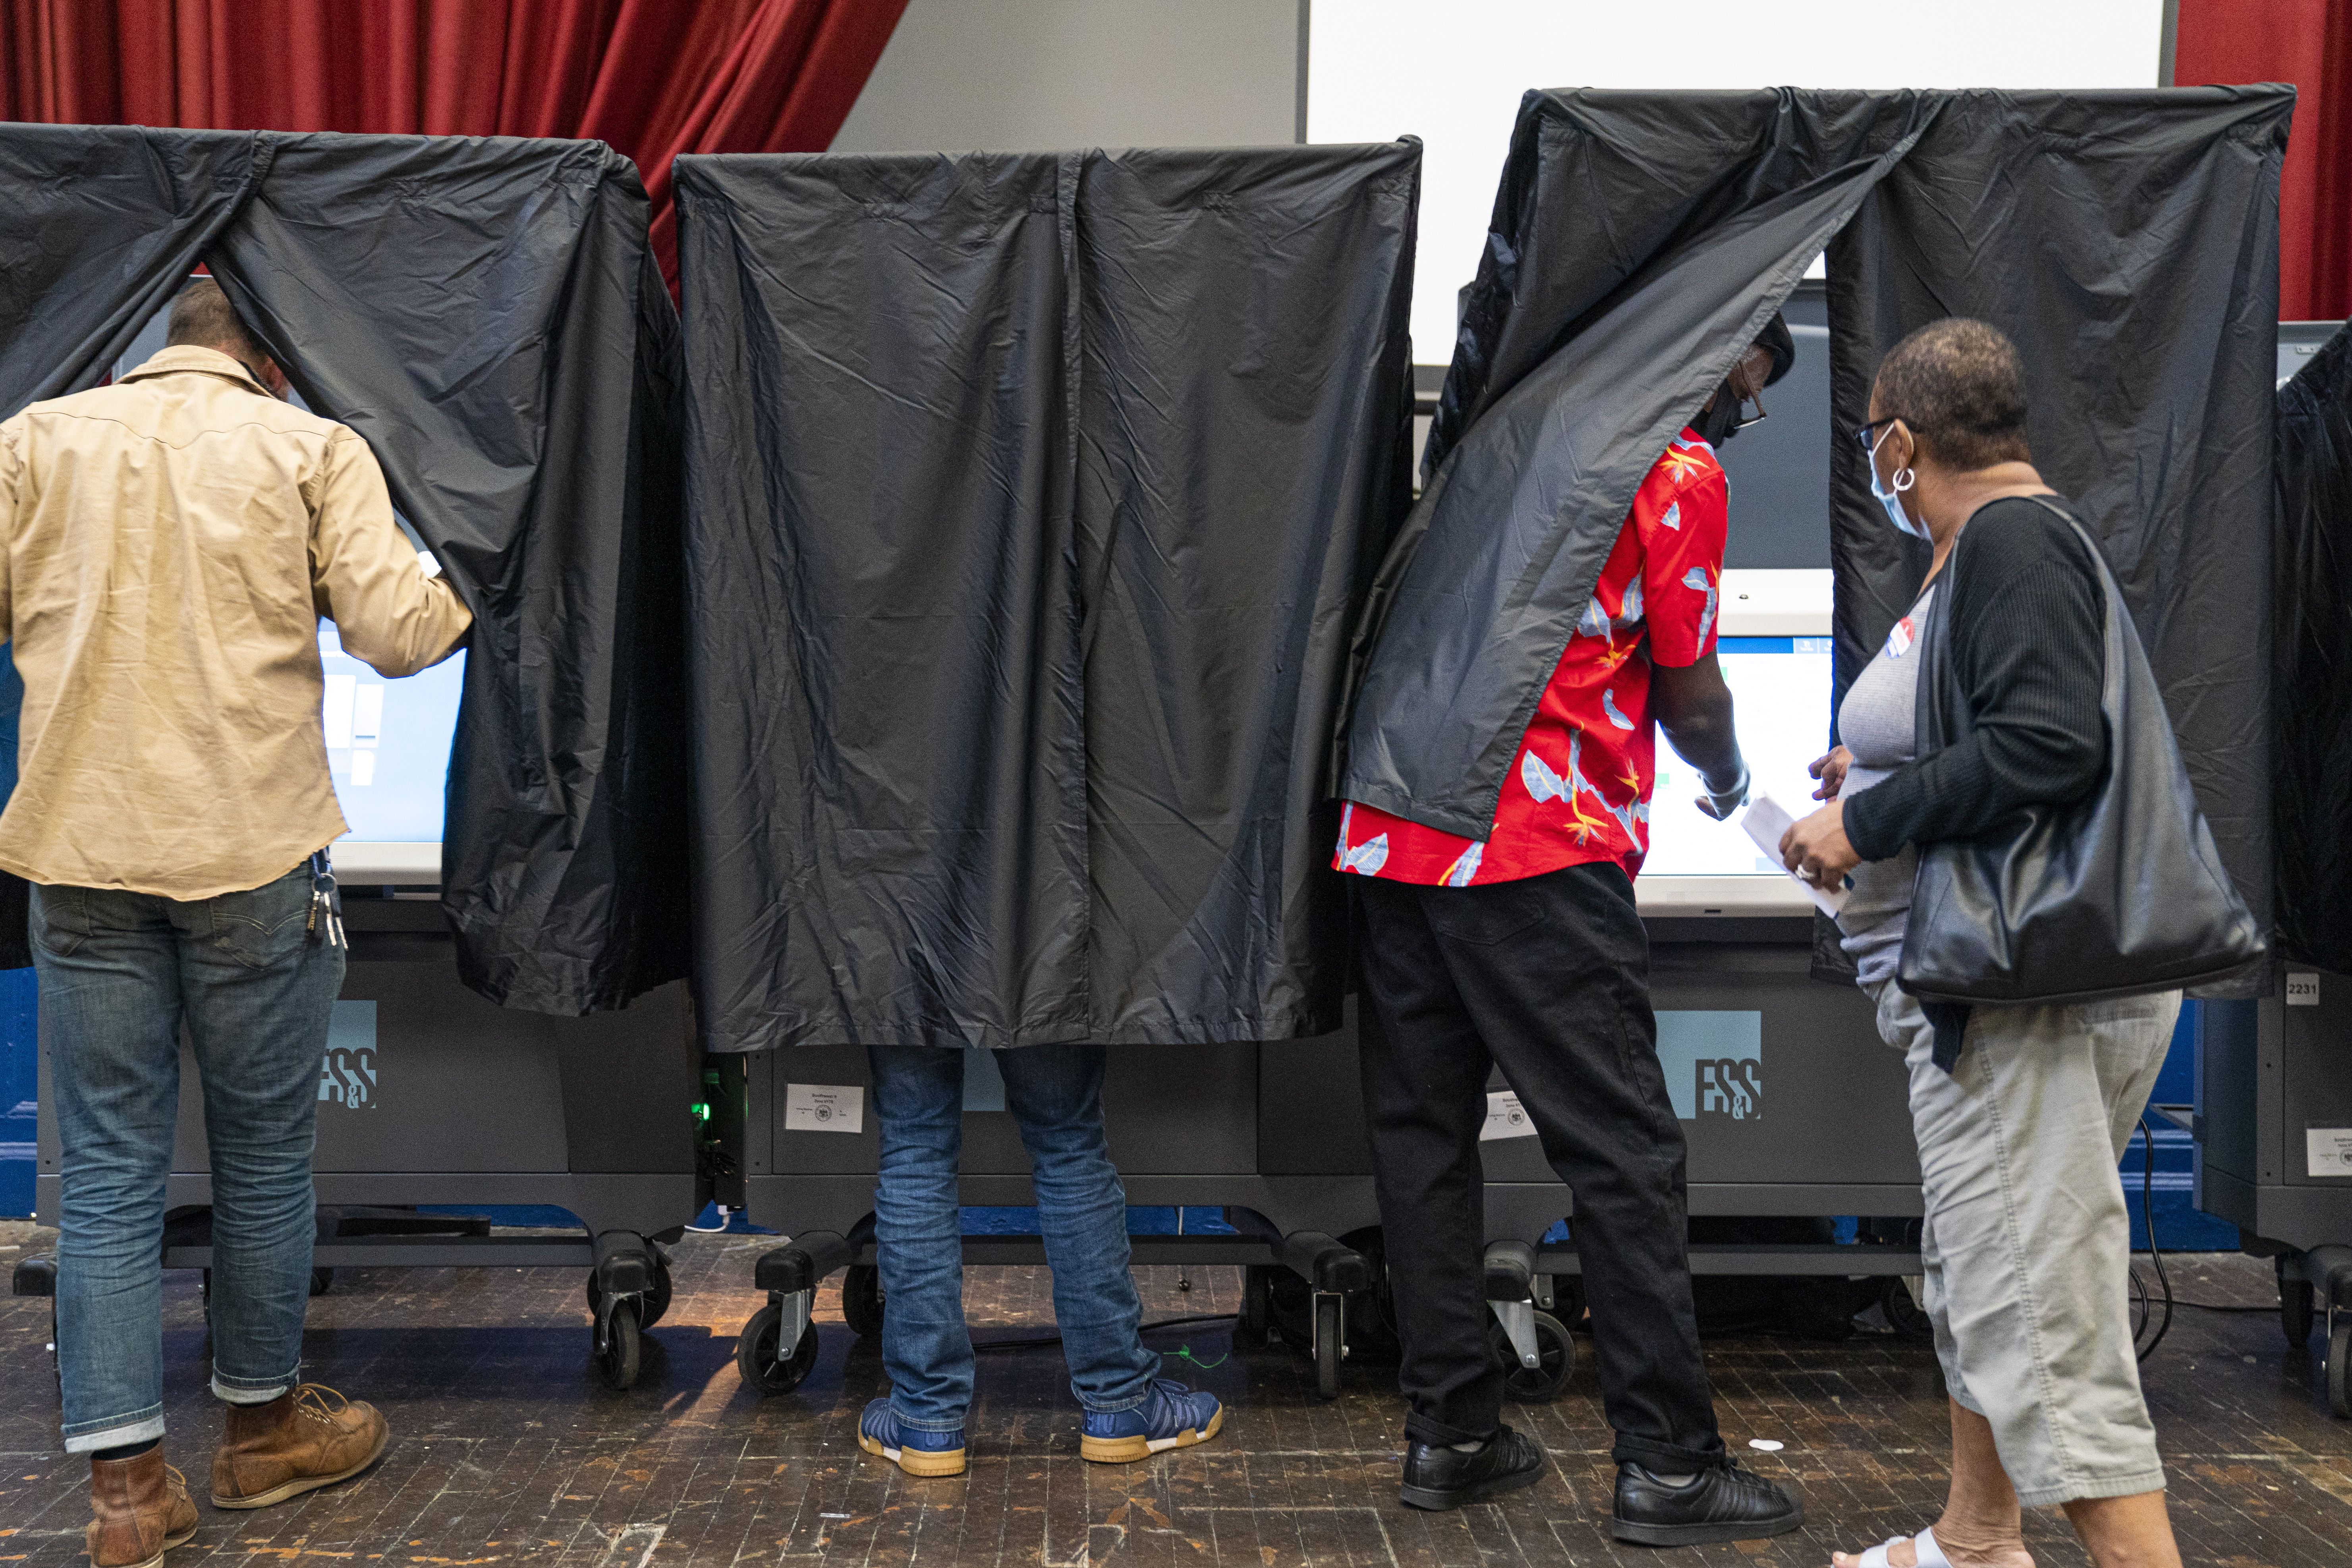 Voters line up inside voting booths